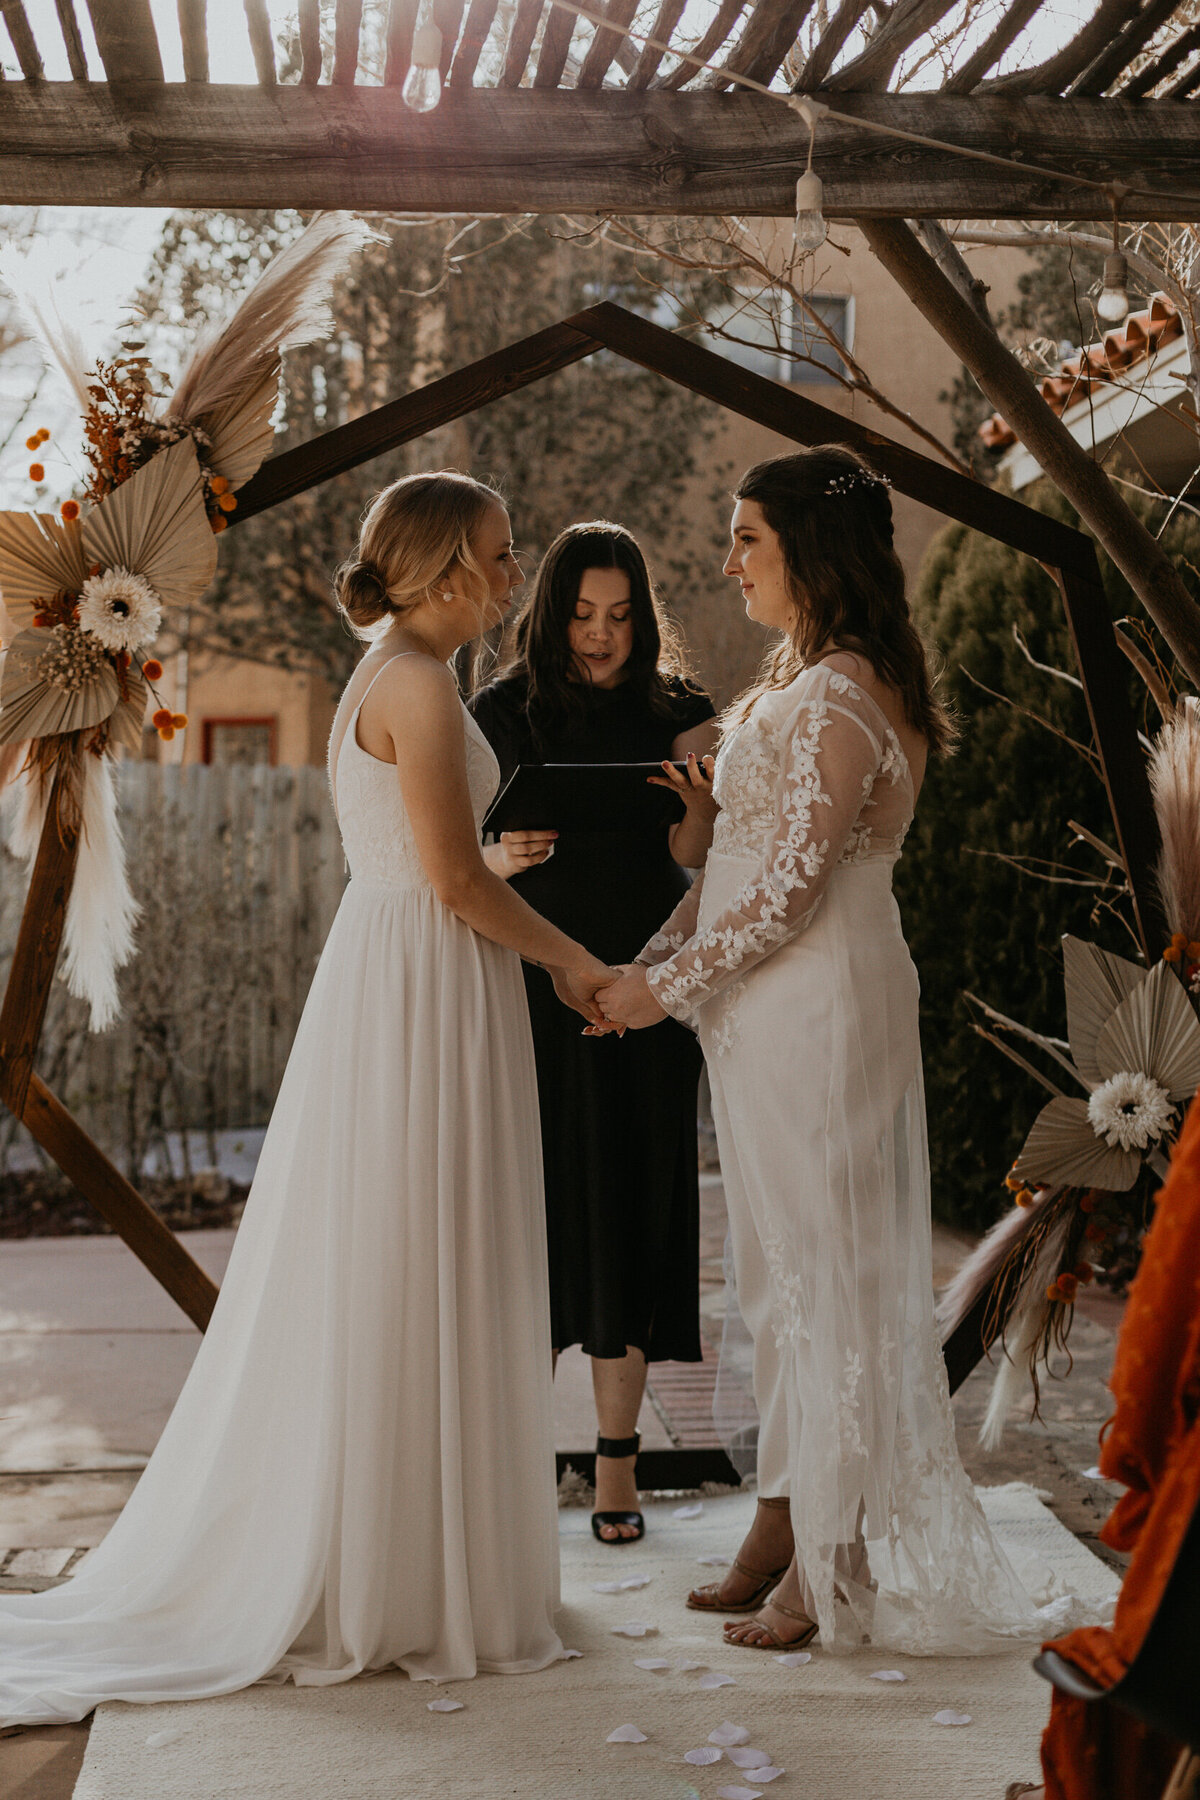 LGBTQ+ intimate ceremony with two brides